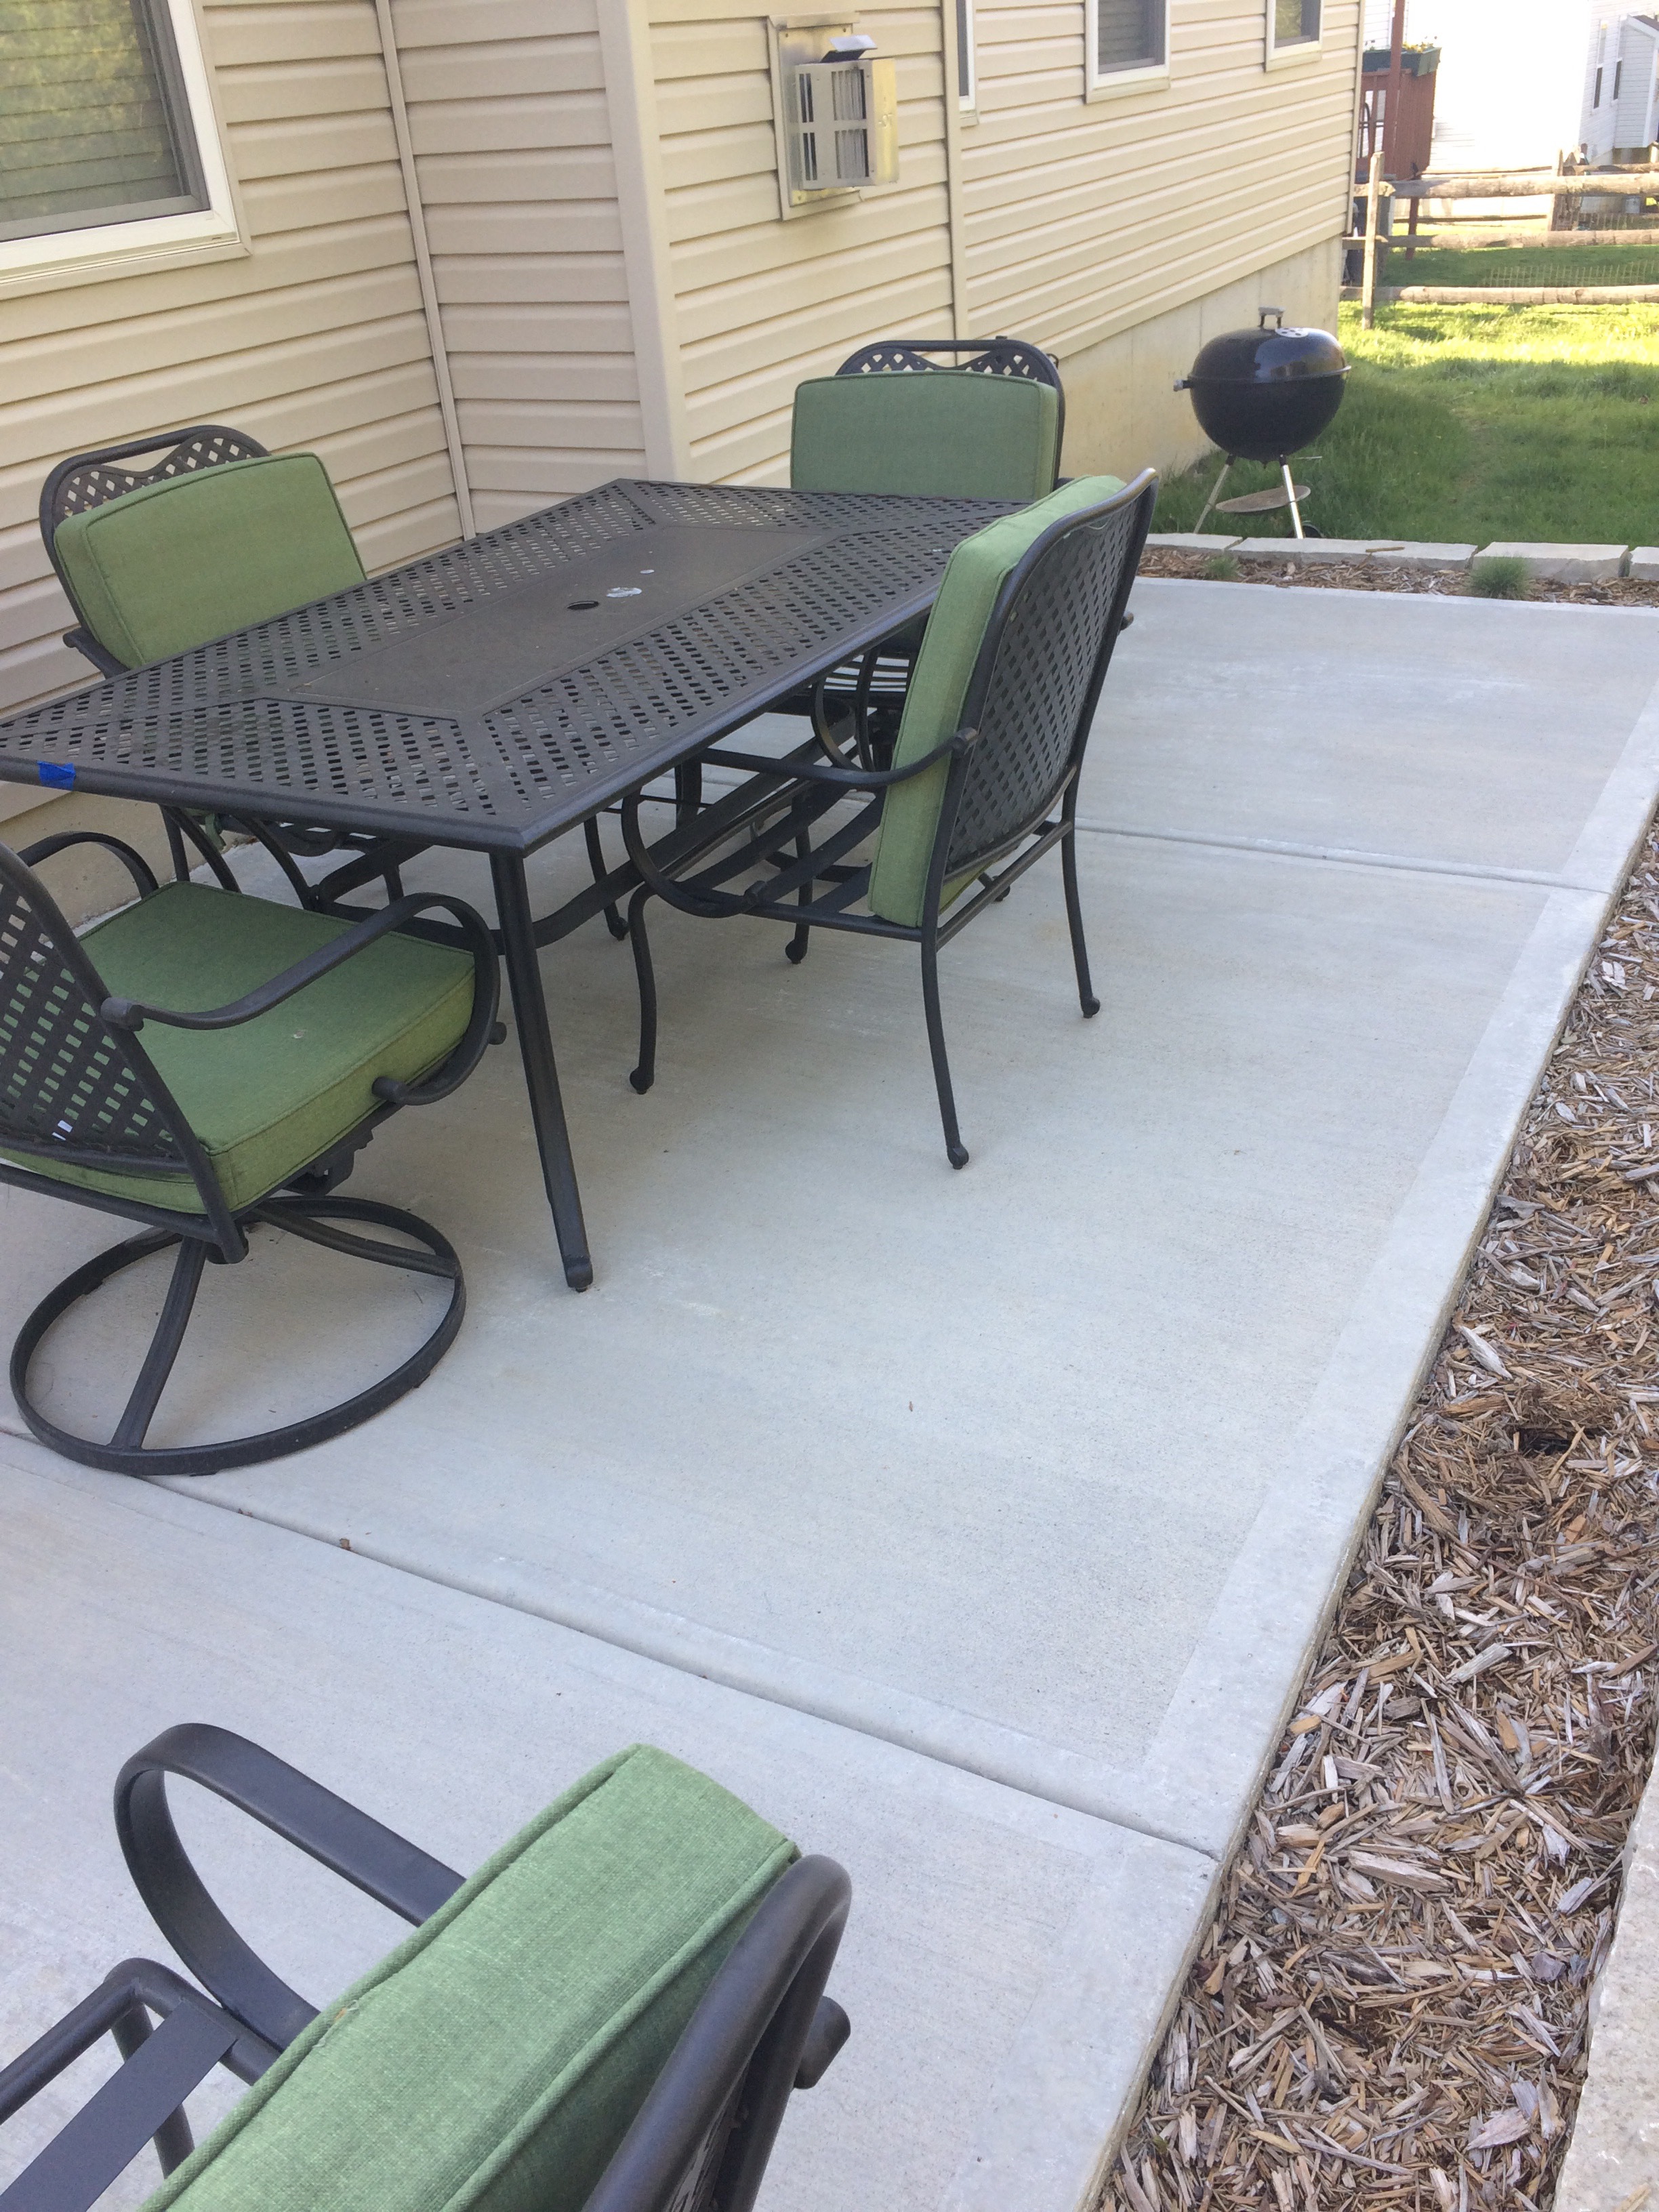 Patio after it was cleaned